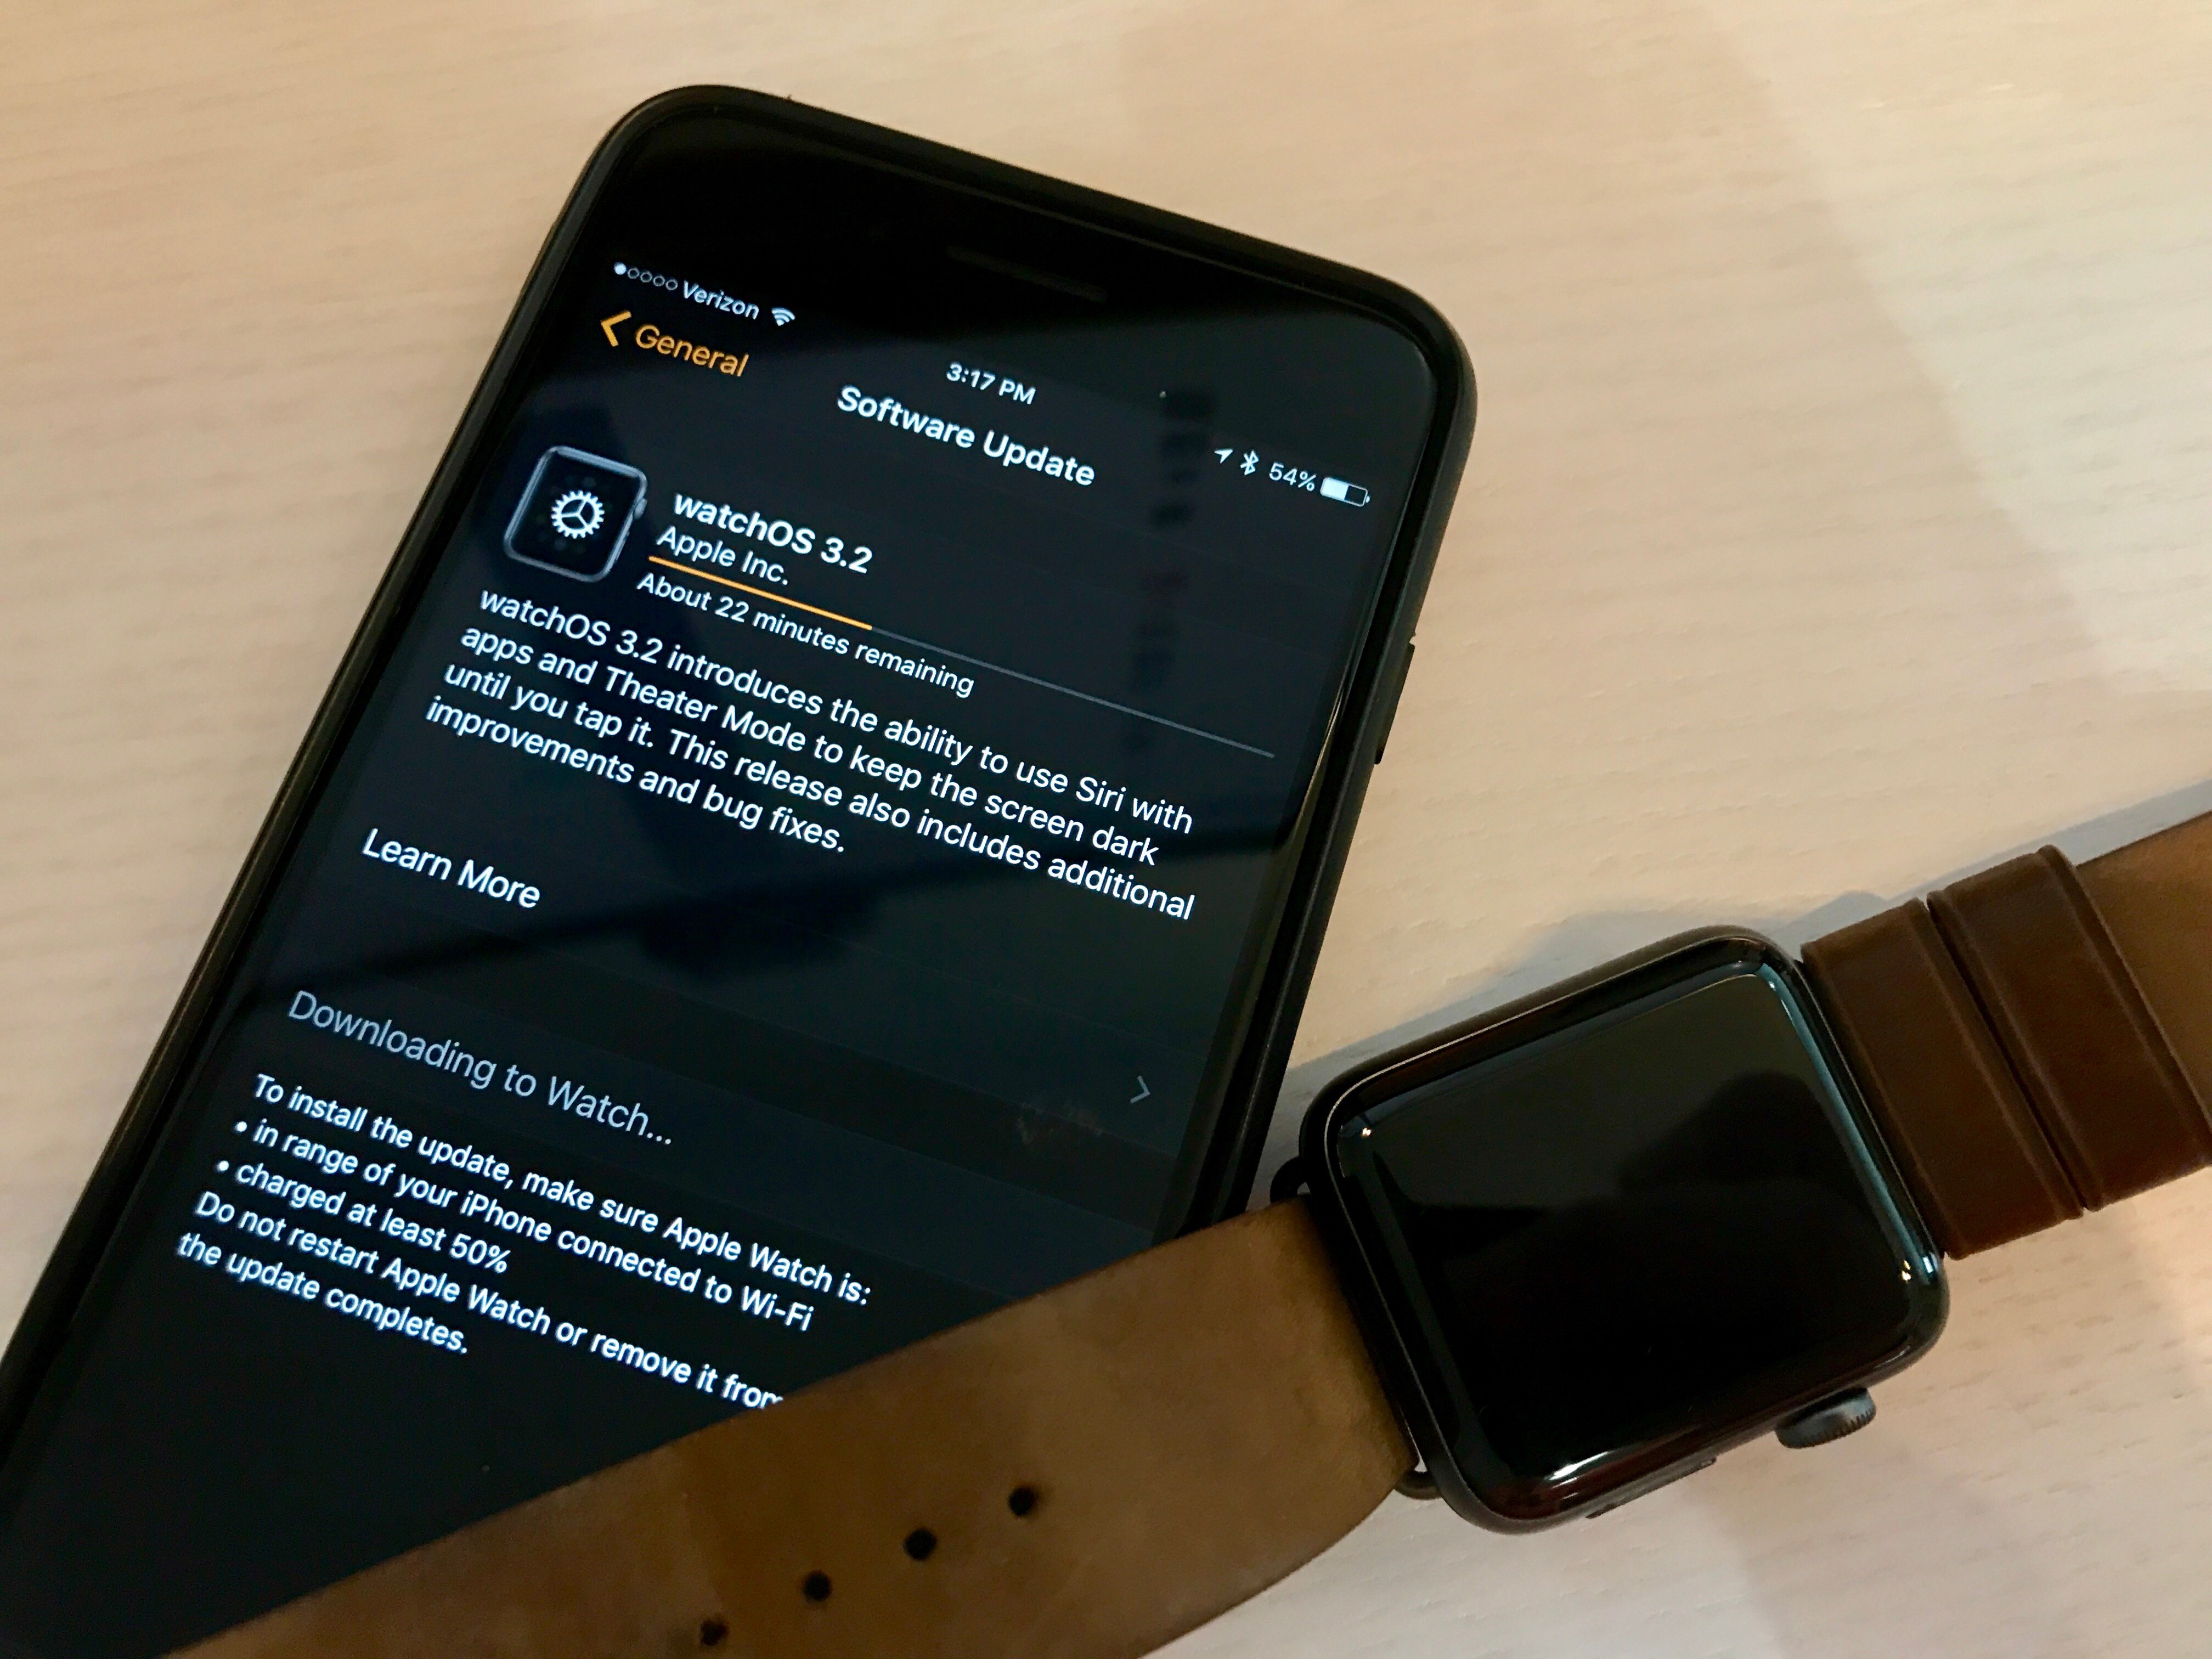 How long the watchOS 3.2 update takes to install on the Apple Watch.